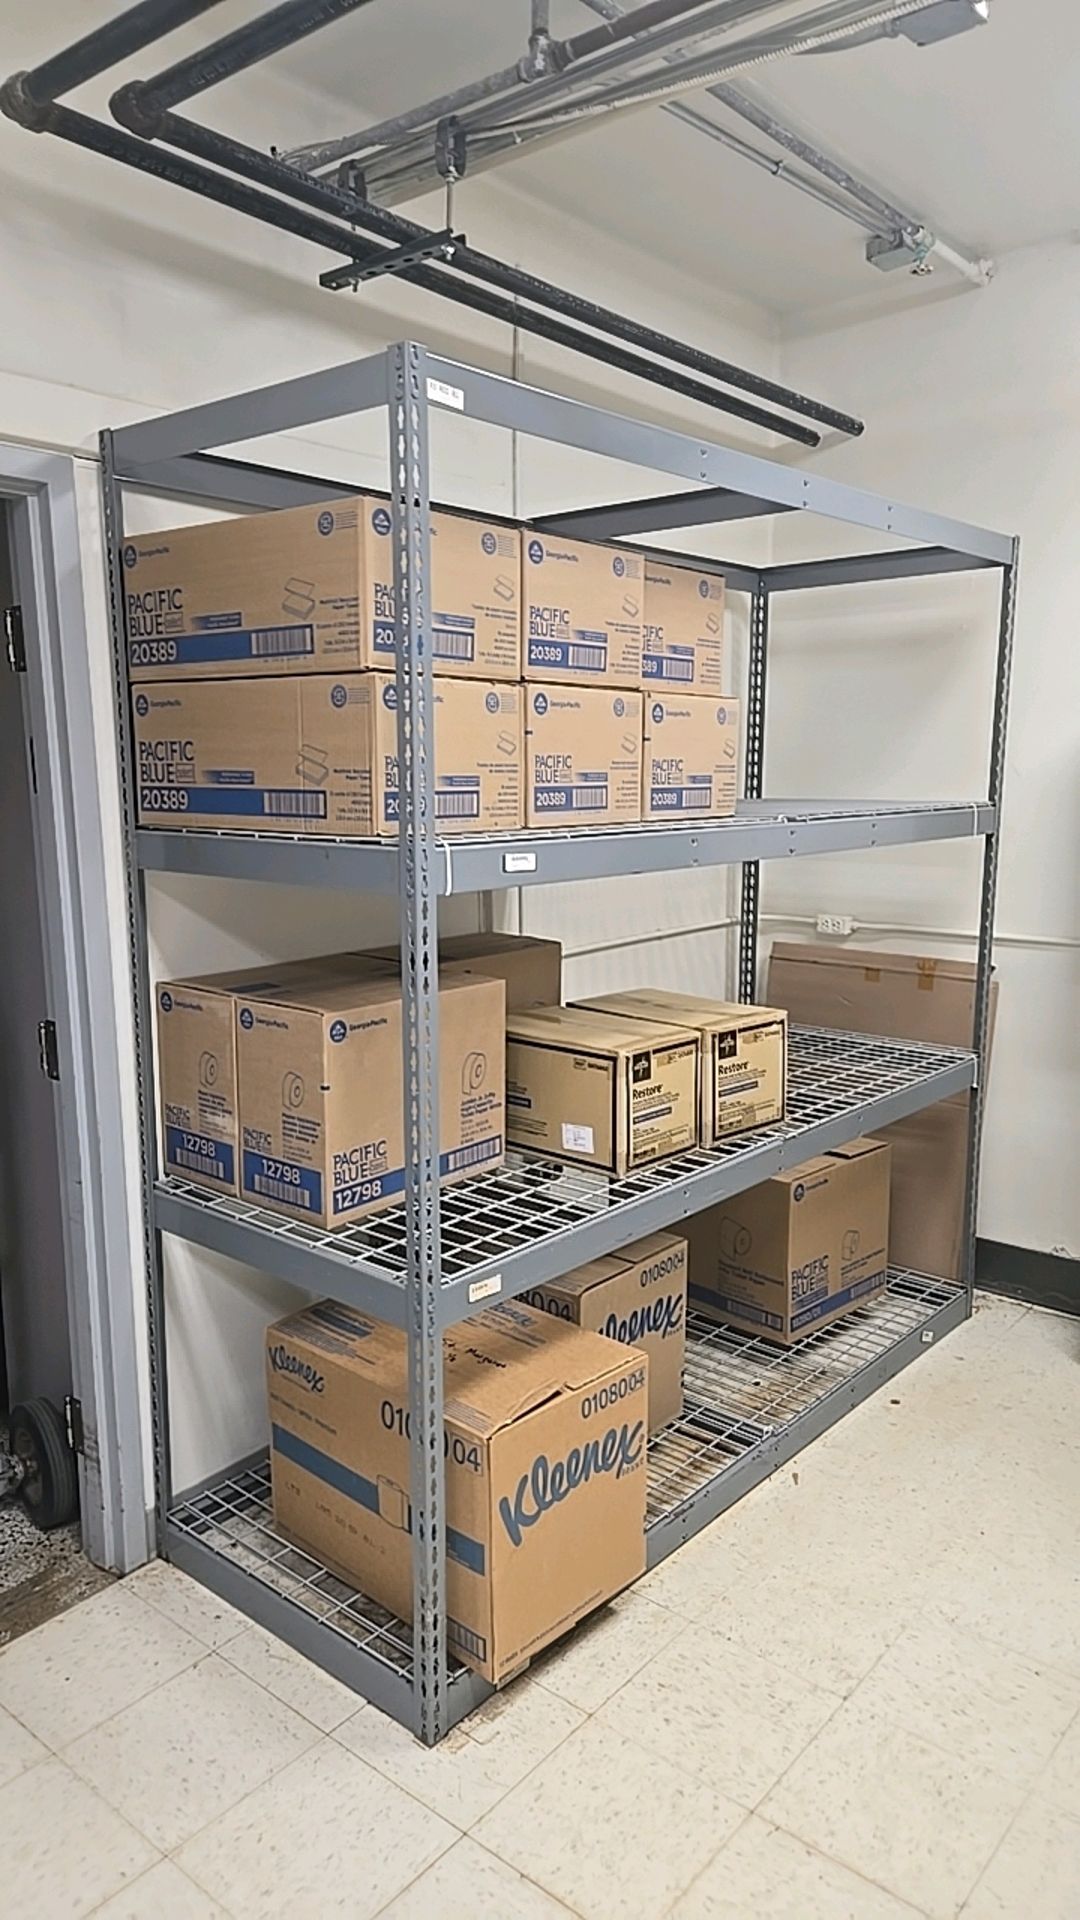 METAL FRAME WIRE SHELVING RACK SYSTEM, QTY. (4) CONTENT NOT INCLUDED) - Image 3 of 4